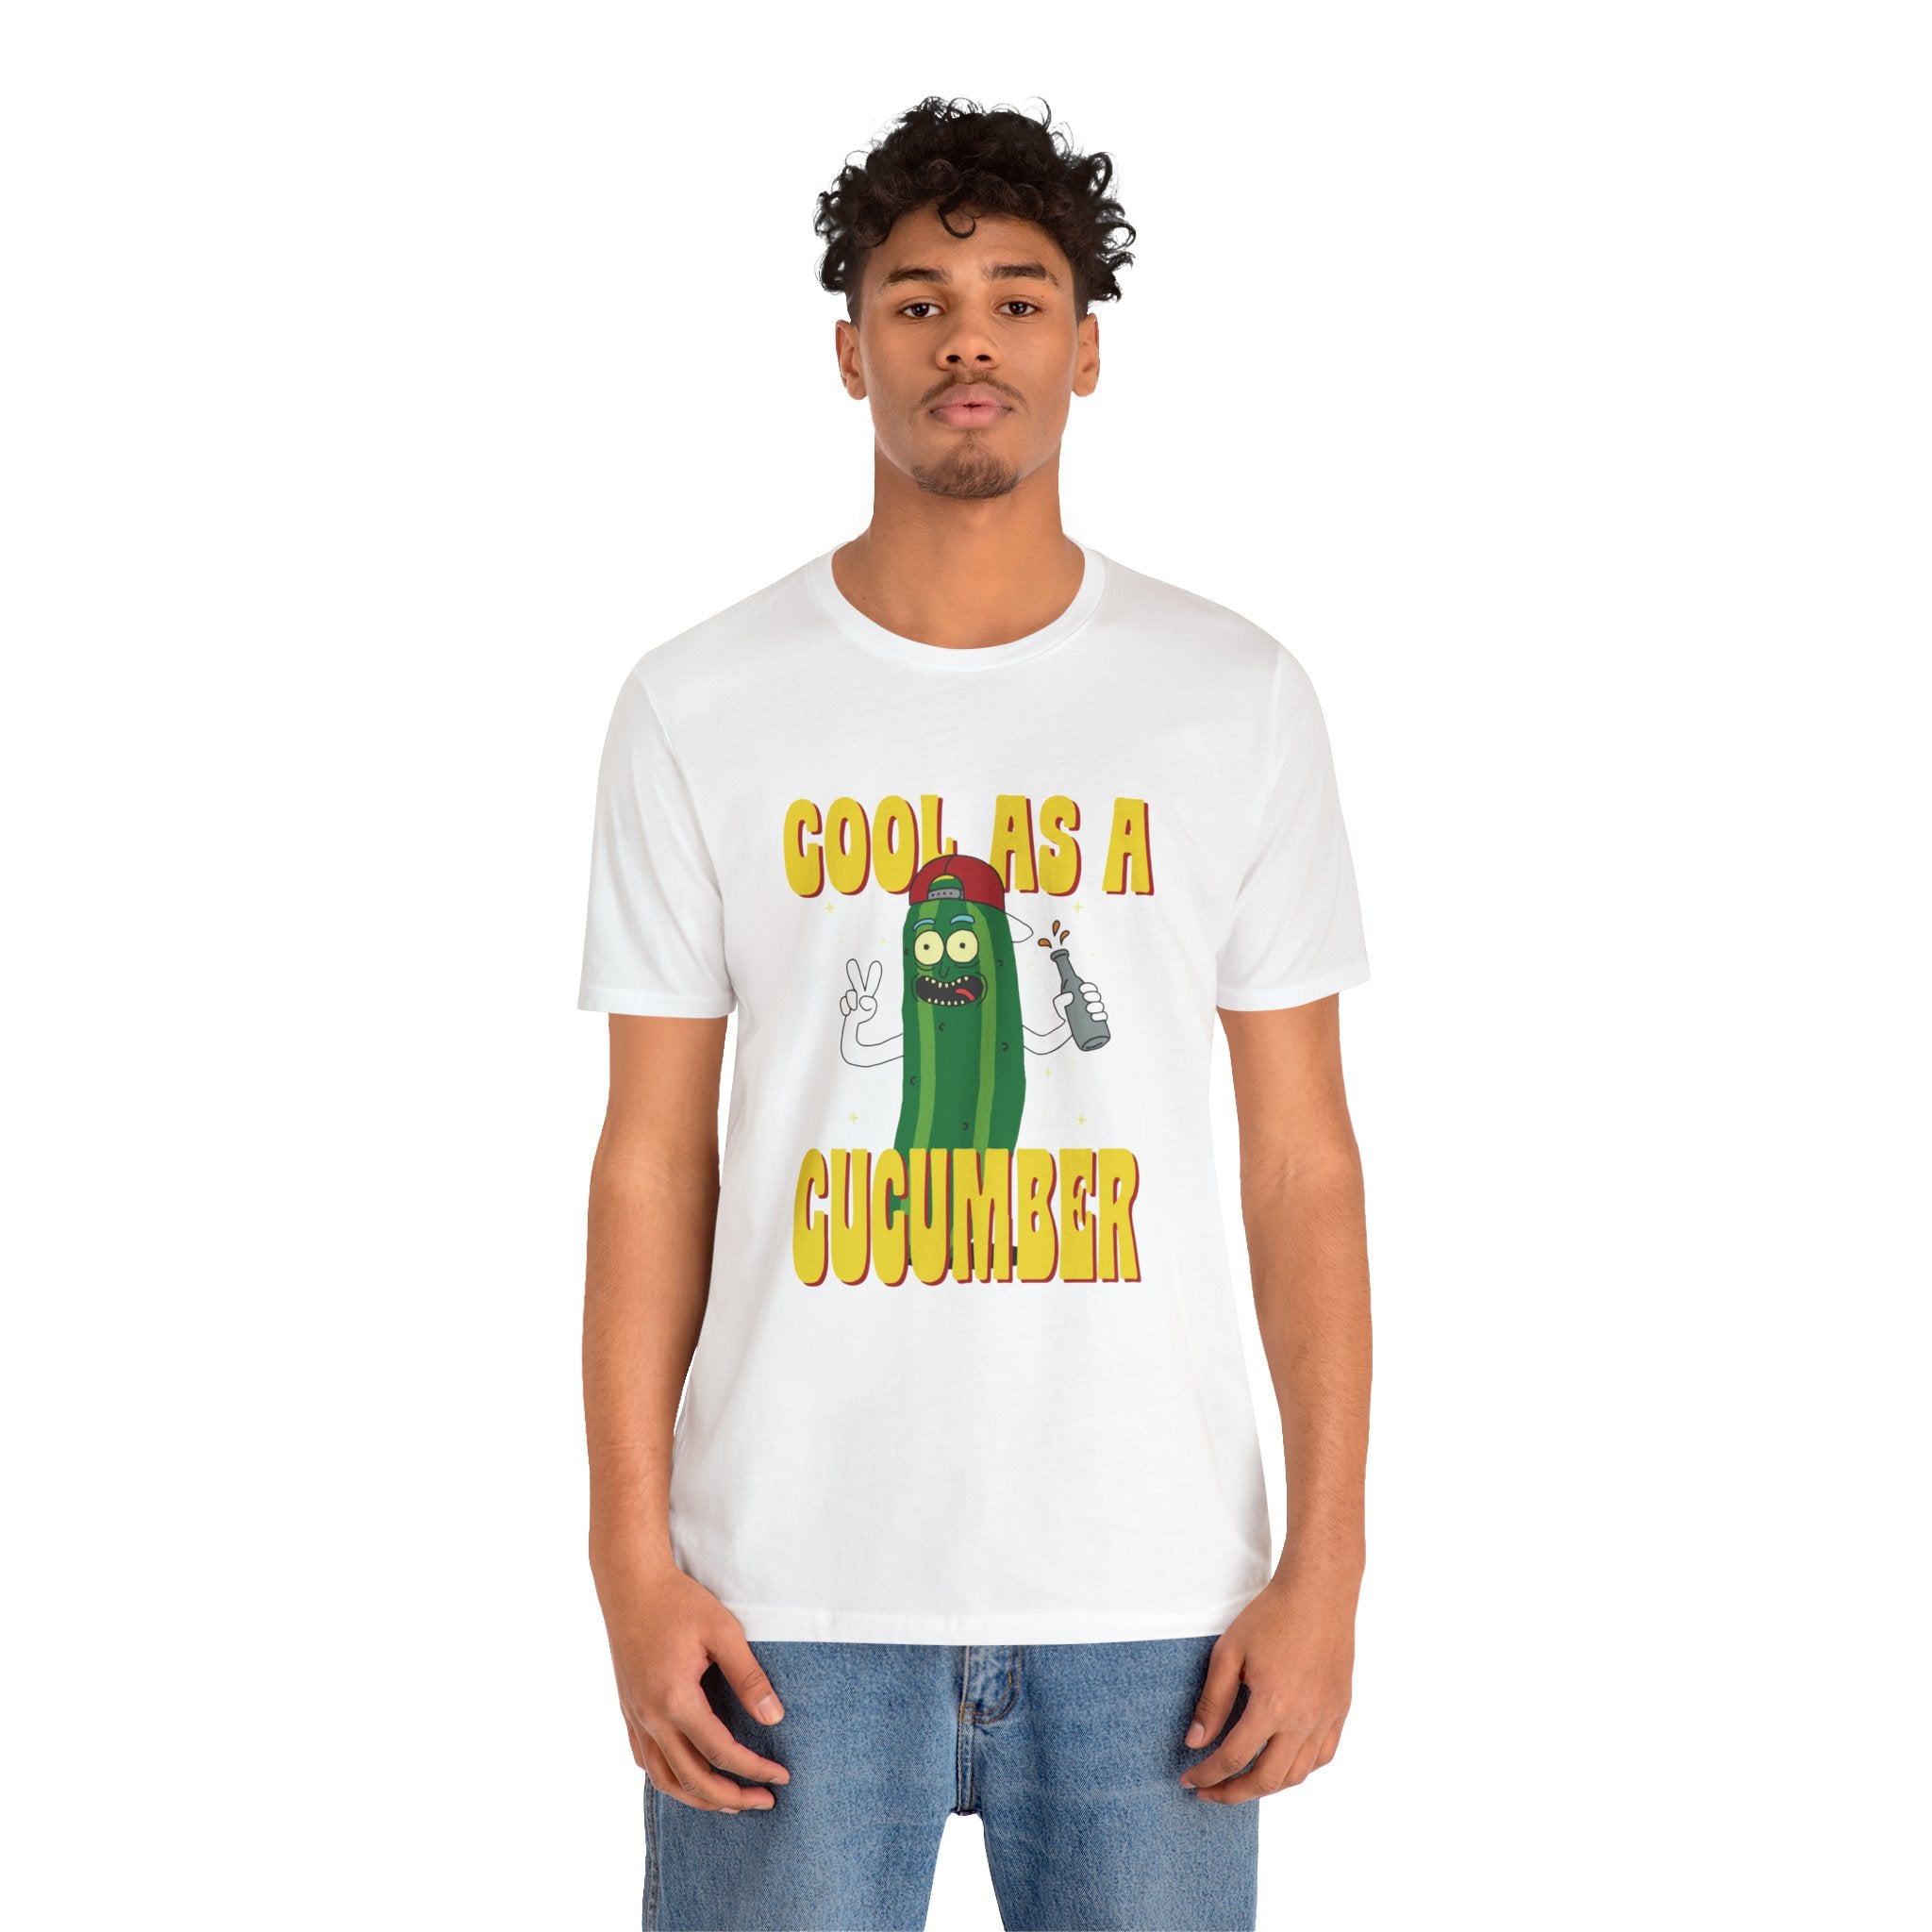 A man in a Cool as a Cucumber, white unisex jersey tee featuring the phrase "cool as a cucumber" with an illustration of a smiling cucumber wearing sunglasses.